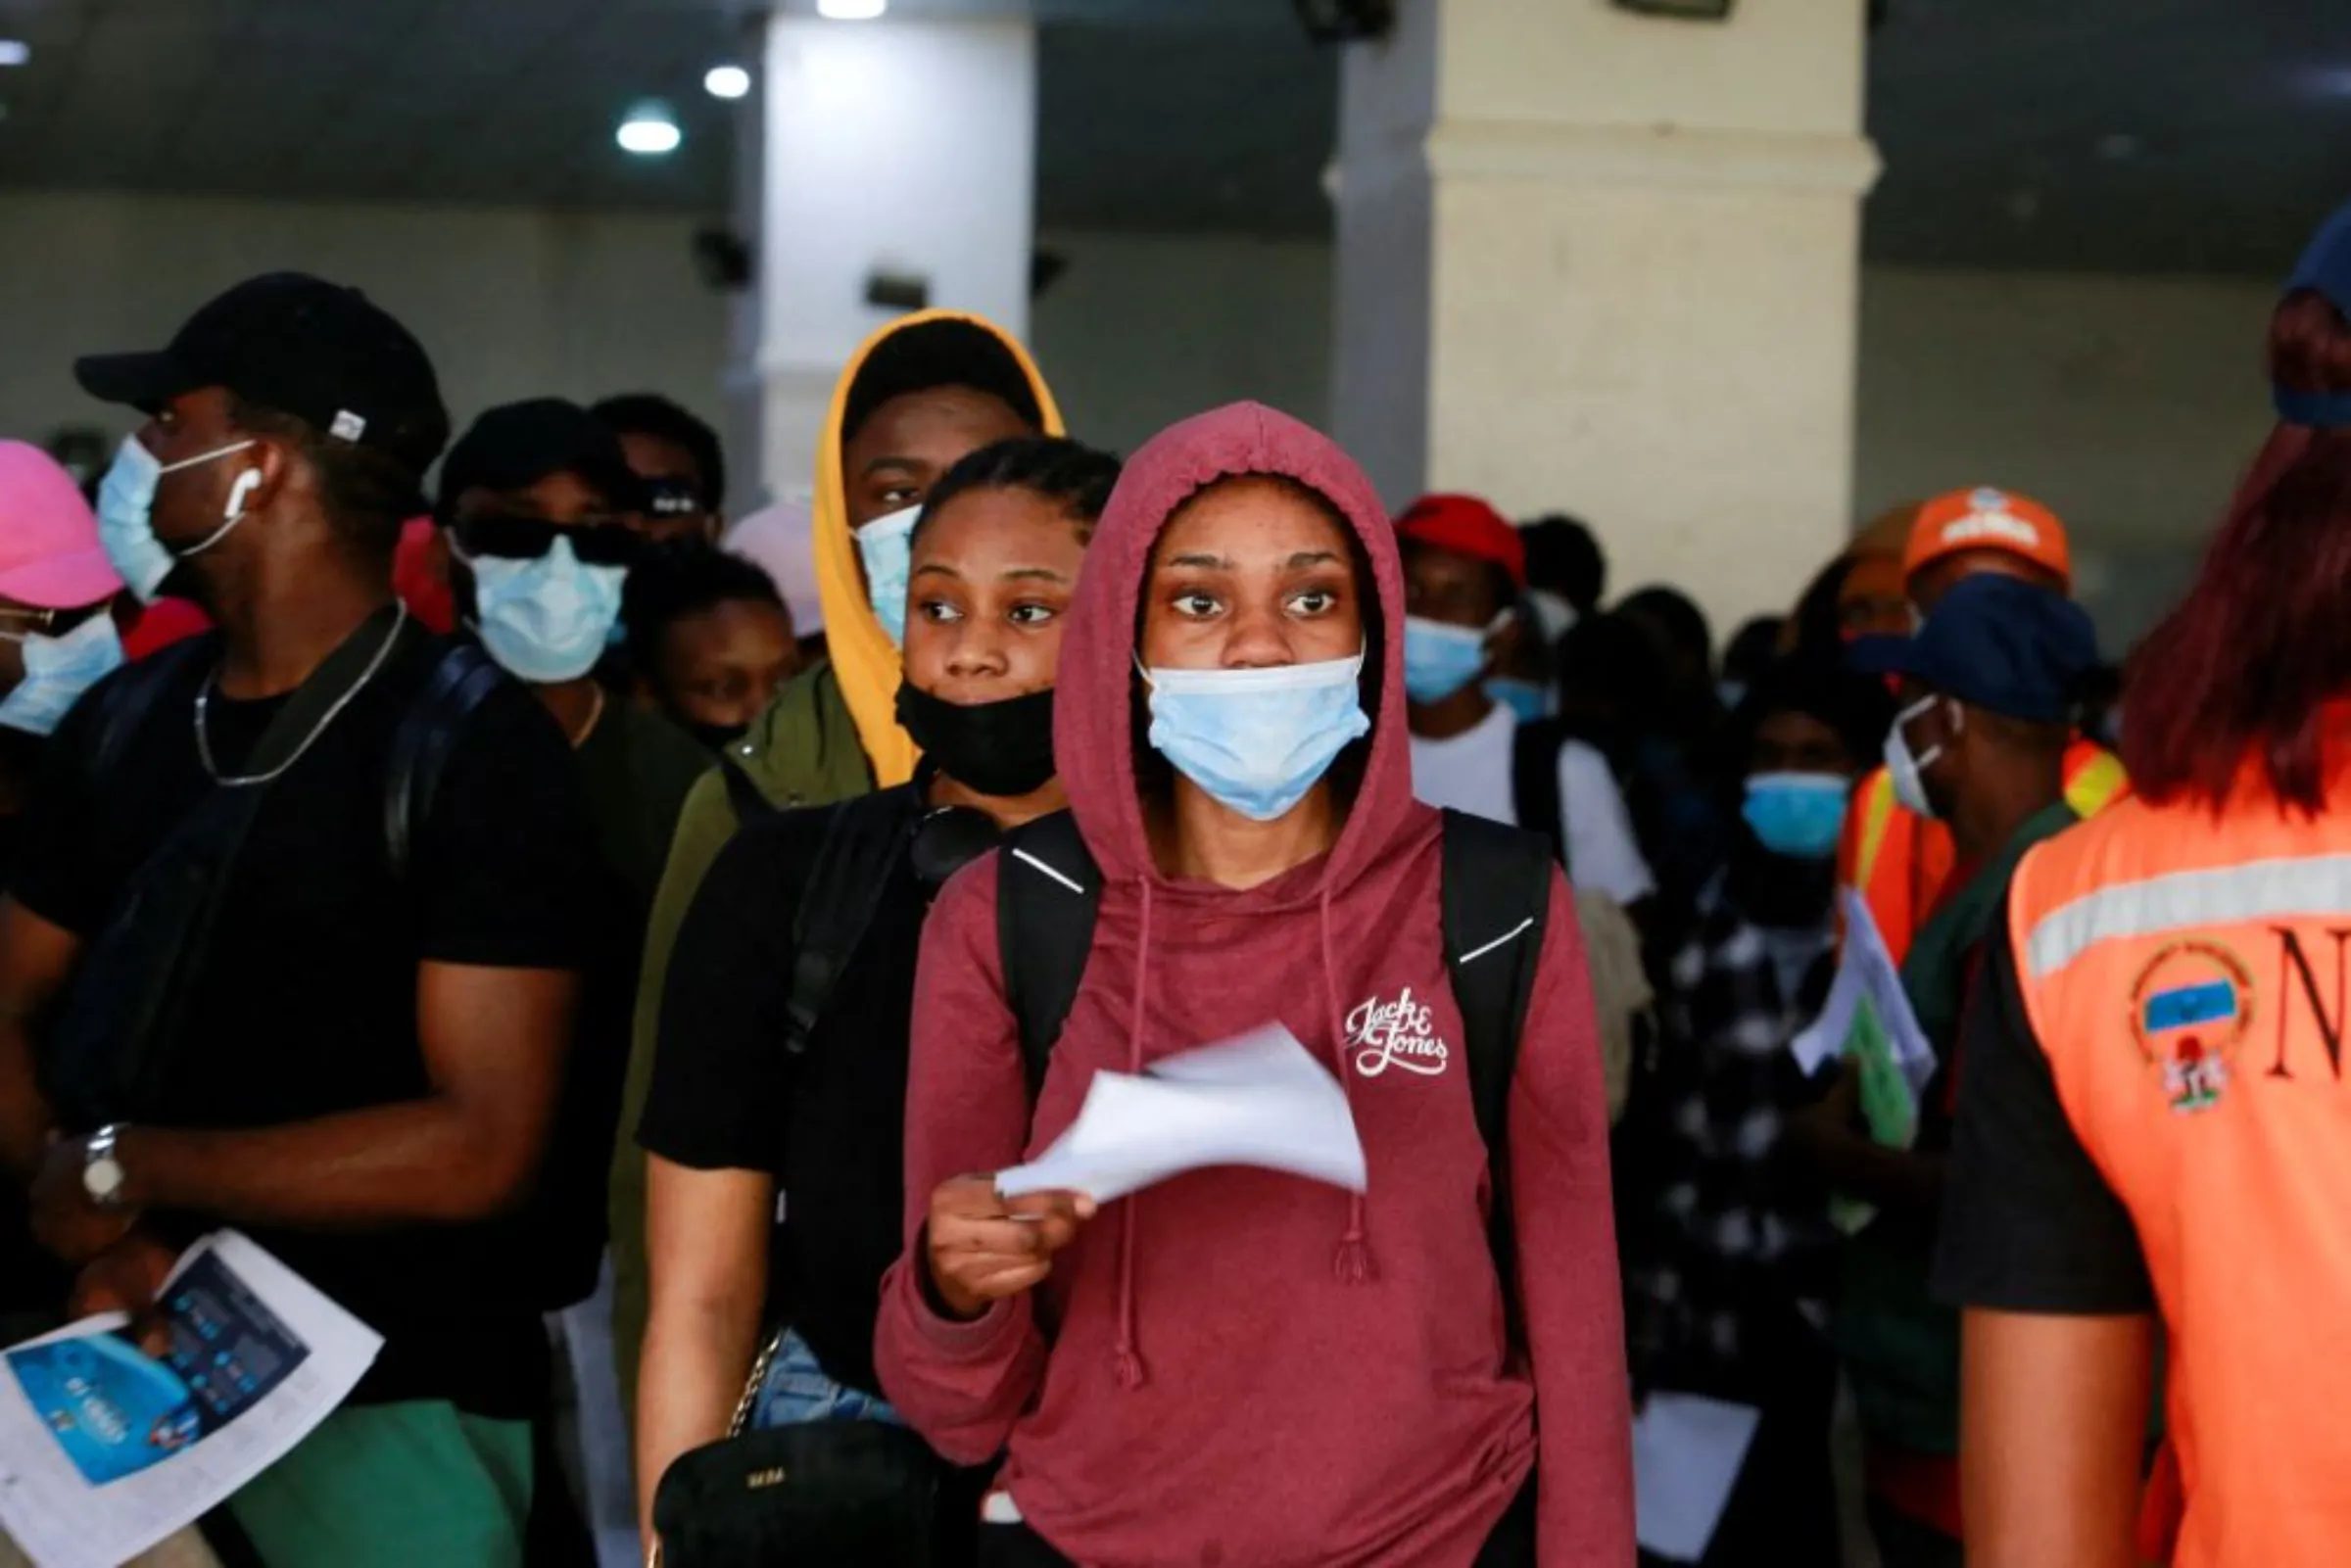 Nigerian students arrive at the Nnamdi Azikiwe International Airport from Ukraine after fleeing the invasion by Russia, in Abuja, Nigeria March 4, 2022